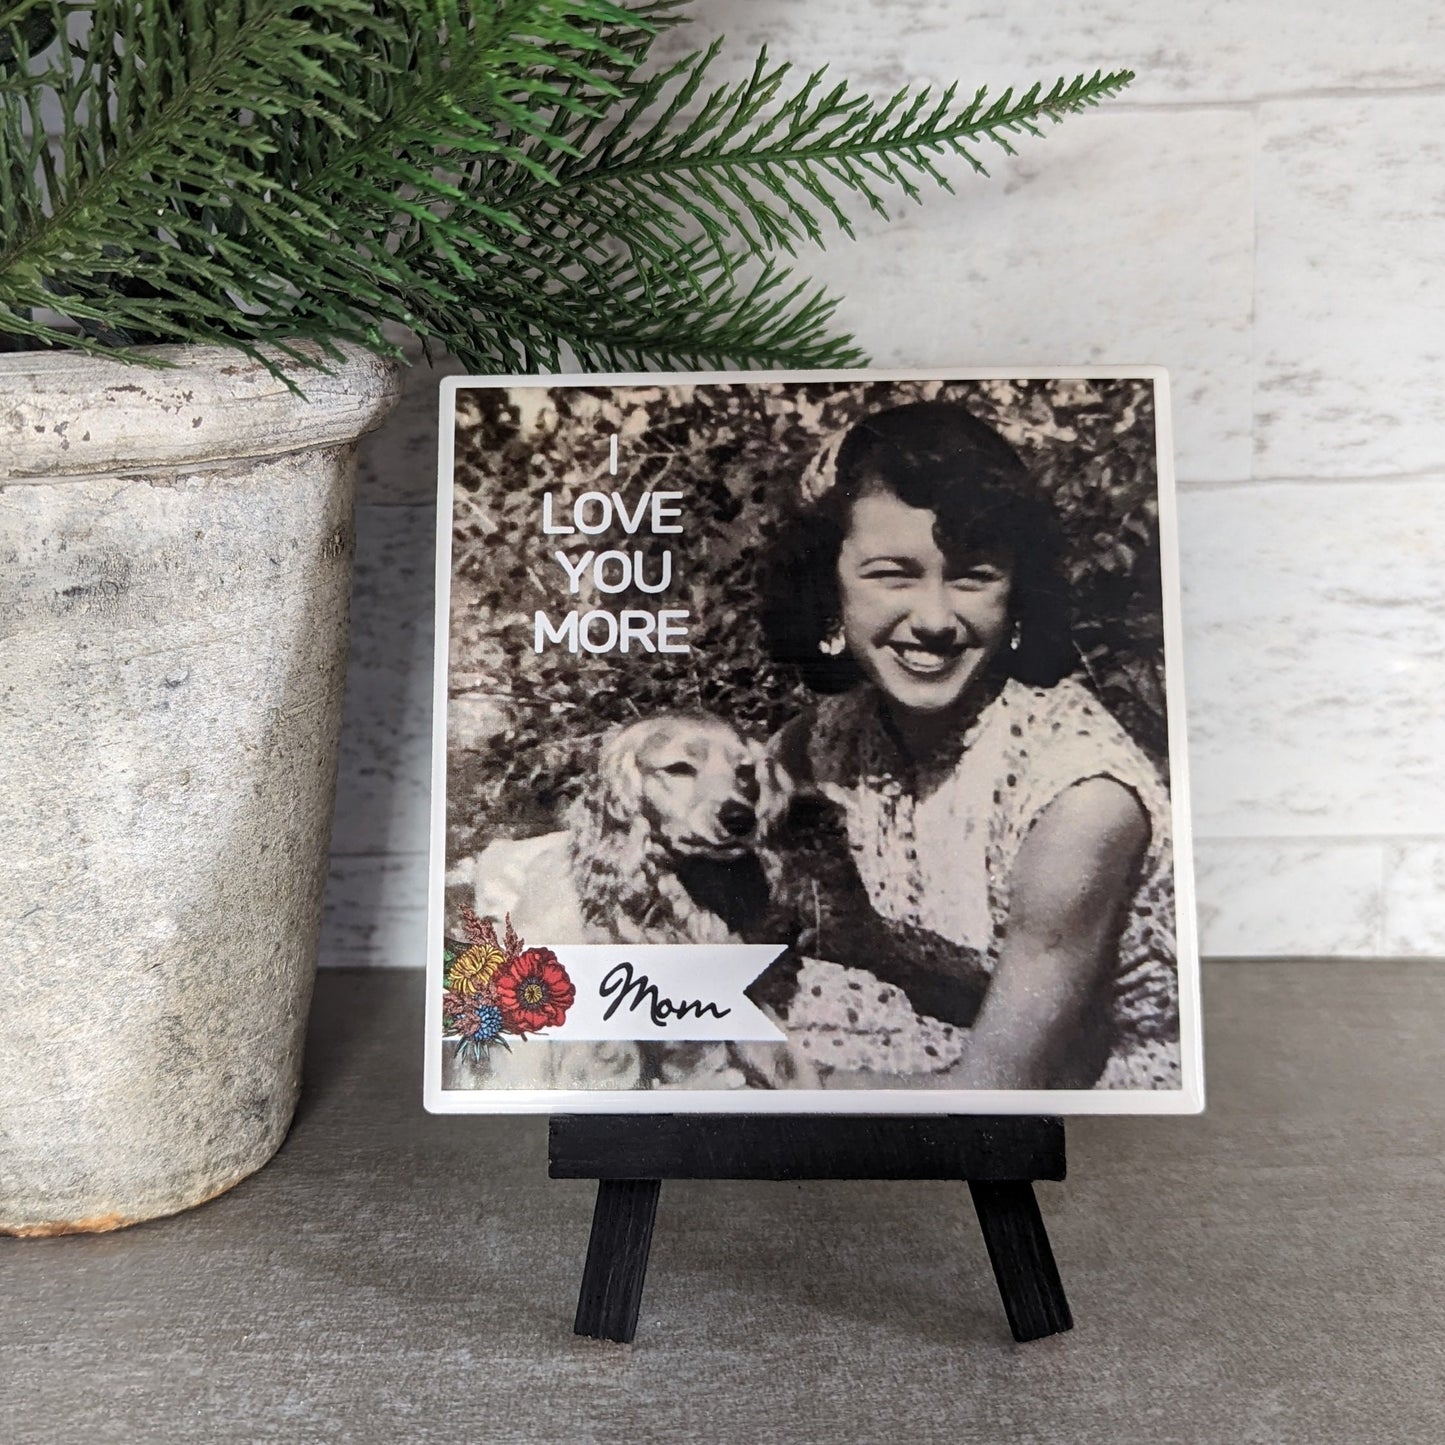 Custom I love you more Tile, Mom, loved one easel sign, photo tile - easel included, your image choice